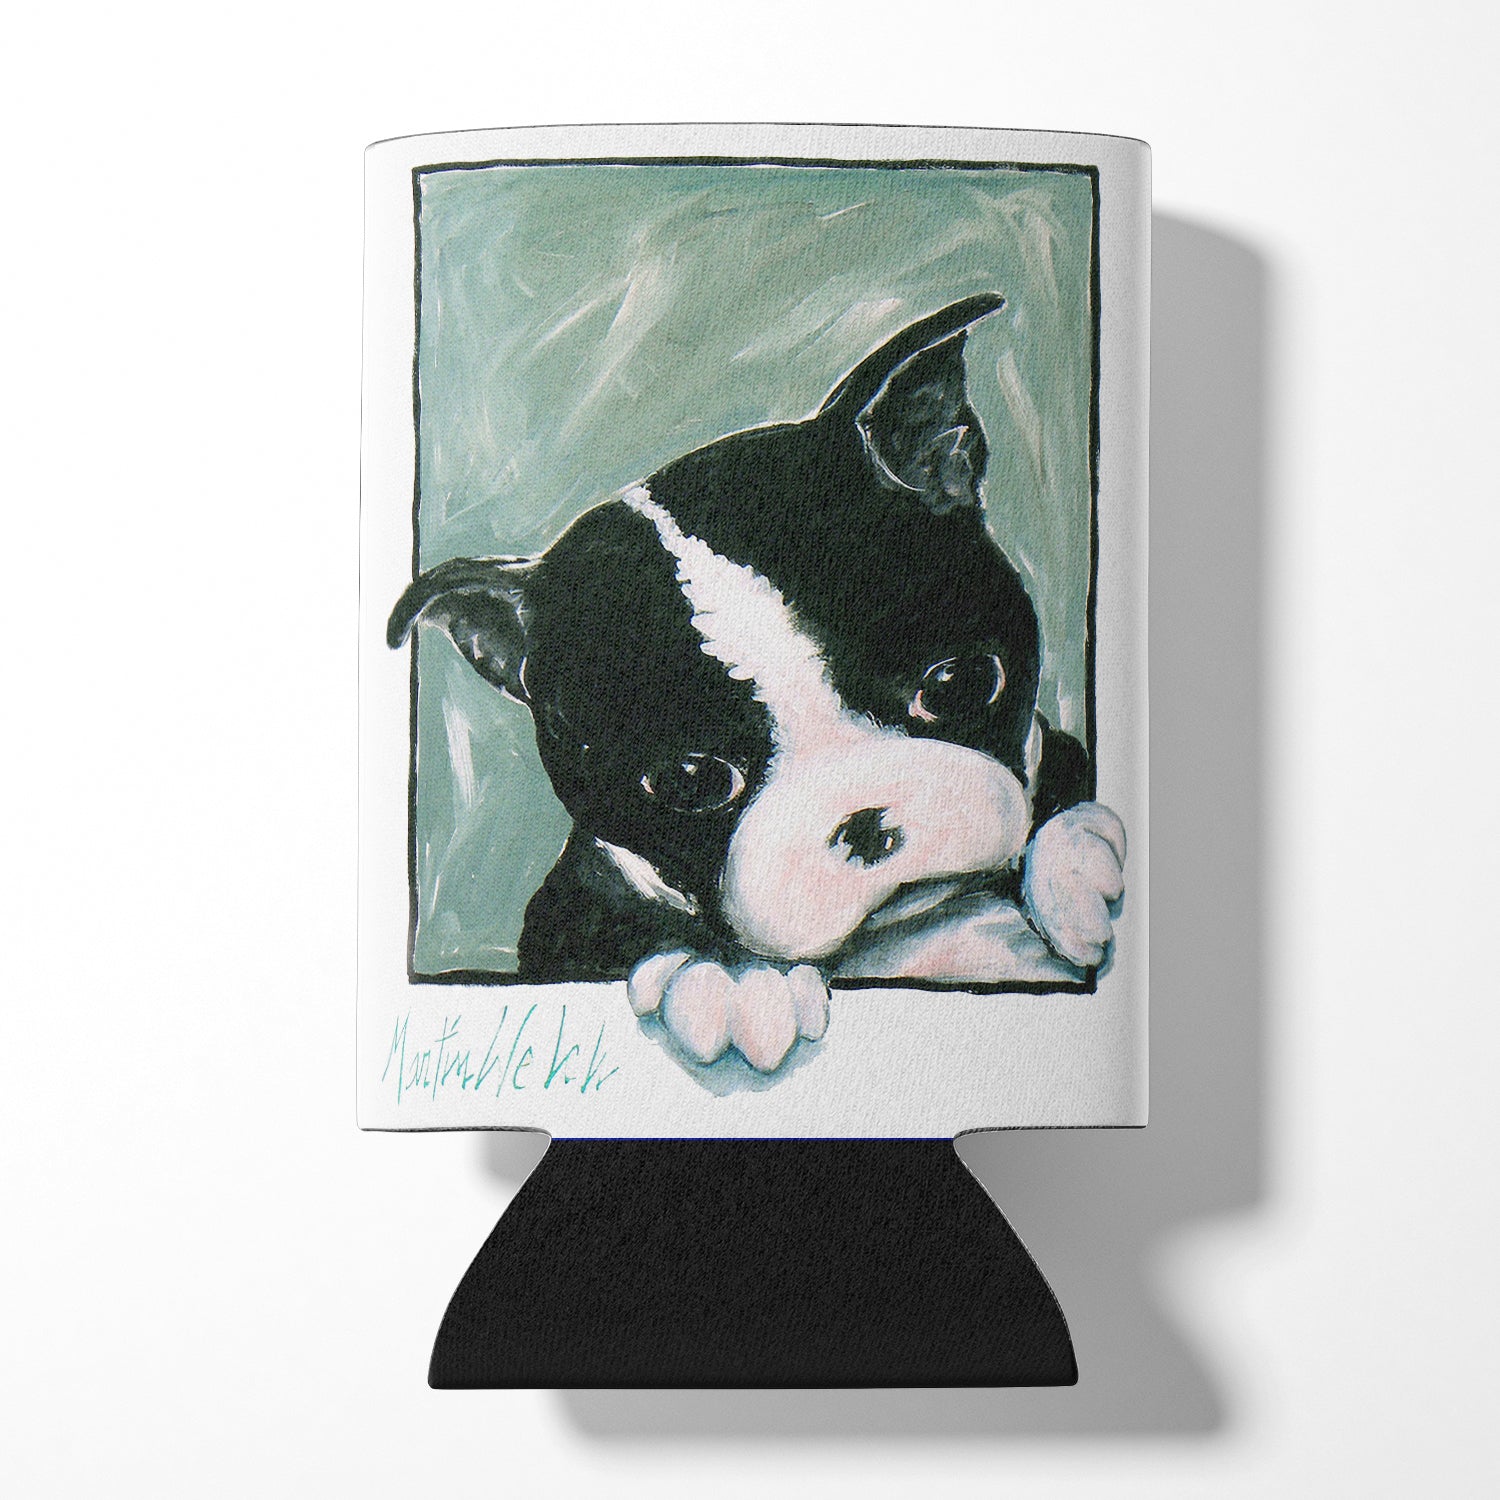 Boston Terrier Don't Leave Me Can or Bottle Hugger MW1313CC  the-store.com.